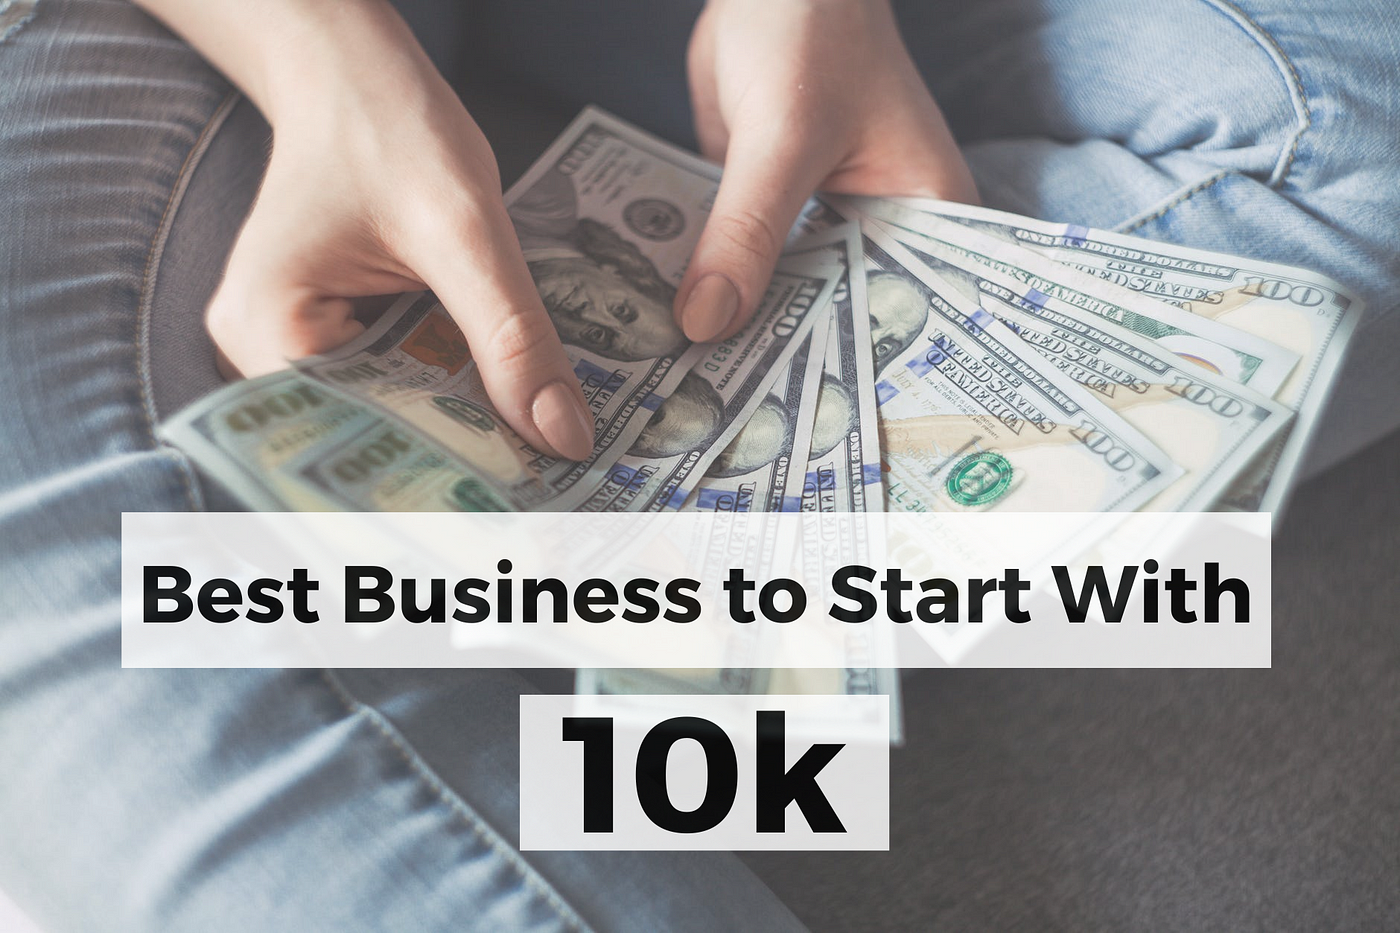 16+ Best Business to Start With 10K Dollars (For 2023) | by Jamie Frank | ILLUMINATION | Medium